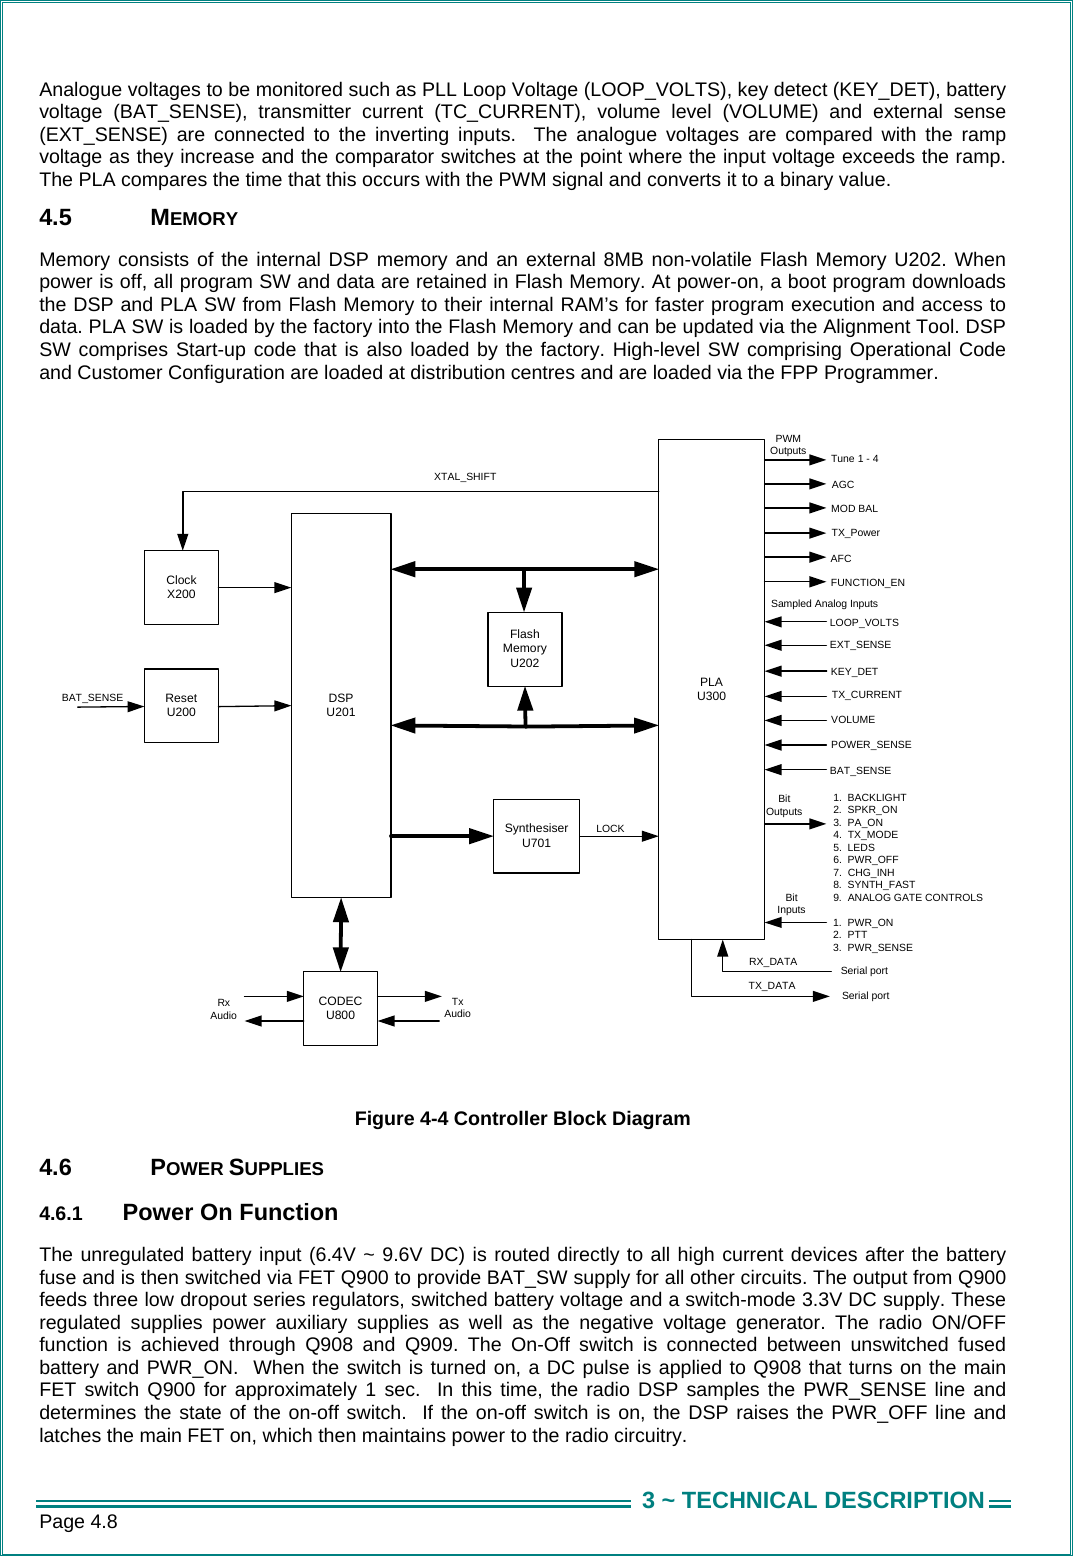 Page 4.8  3 ~ TECHNICAL DESCRIPTIONAnalogue voltages to be monitored such as PLL Loop Voltage (LOOP_VOLTS), key detect (KEY_DET), battery voltage (BAT_SENSE), transmitter current (TC_CURRENT), volume level (VOLUME) and external sense (EXT_SENSE) are connected to the inverting inputs.  The analogue voltages are compared with the ramp voltage as they increase and the comparator switches at the point where the input voltage exceeds the ramp.  The PLA compares the time that this occurs with the PWM signal and converts it to a binary value.  4.5 MEMORY Memory consists of the internal DSP memory and an external 8MB non-volatile Flash Memory U202. When power is off, all program SW and data are retained in Flash Memory. At power-on, a boot program downloads the DSP and PLA SW from Flash Memory to their internal RAM’s for faster program execution and access to data. PLA SW is loaded by the factory into the Flash Memory and can be updated via the Alignment Tool. DSP SW comprises Start-up code that is also loaded by the factory. High-level SW comprising Operational Code and Customer Configuration are loaded at distribution centres and are loaded via the FPP Programmer.  DSP U201SynthesiserU701PLAU300ResetU200ClockX200Flash MemoryU202CODECU800Serial portSerial portTX_DATARX_DATAXTAL_SHIFT AGCTX_Power 1.  BACKLIGHT2.  SPKR_ON3.  PA_ON4.  TX_MODE5.  LEDS6.  PWR_OFF7.  CHG_INH8.  SYNTH_FAST9.  ANALOG GATE CONTROLS Tune 1 - 4BAT_SENSERxAudioTxAudioAFCFUNCTION_ENLOOP_VOLTSEXT_SENSE1.  PWR_ON2.  PTT3.  PWR_SENSEBit OutputsTX_CURRENTVOLUMEPOWER_SENSEMOD BALBit InputsLOCKPWMOutputsSampled Analog InputsKEY_DETBAT_SENSE  Figure 4-4 Controller Block Diagram 4.6 POWER SUPPLIES 4.6.1  Power On Function The unregulated battery input (6.4V ~ 9.6V DC) is routed directly to all high current devices after the battery fuse and is then switched via FET Q900 to provide BAT_SW supply for all other circuits. The output from Q900 feeds three low dropout series regulators, switched battery voltage and a switch-mode 3.3V DC supply. These regulated supplies power auxiliary supplies as well as the negative voltage generator. The radio ON/OFF function is achieved through Q908 and Q909. The On-Off switch is connected between unswitched fused battery and PWR_ON.  When the switch is turned on, a DC pulse is applied to Q908 that turns on the main FET switch Q900 for approximately 1 sec.  In this time, the radio DSP samples the PWR_SENSE line and determines the state of the on-off switch.  If the on-off switch is on, the DSP raises the PWR_OFF line and latches the main FET on, which then maintains power to the radio circuitry.  